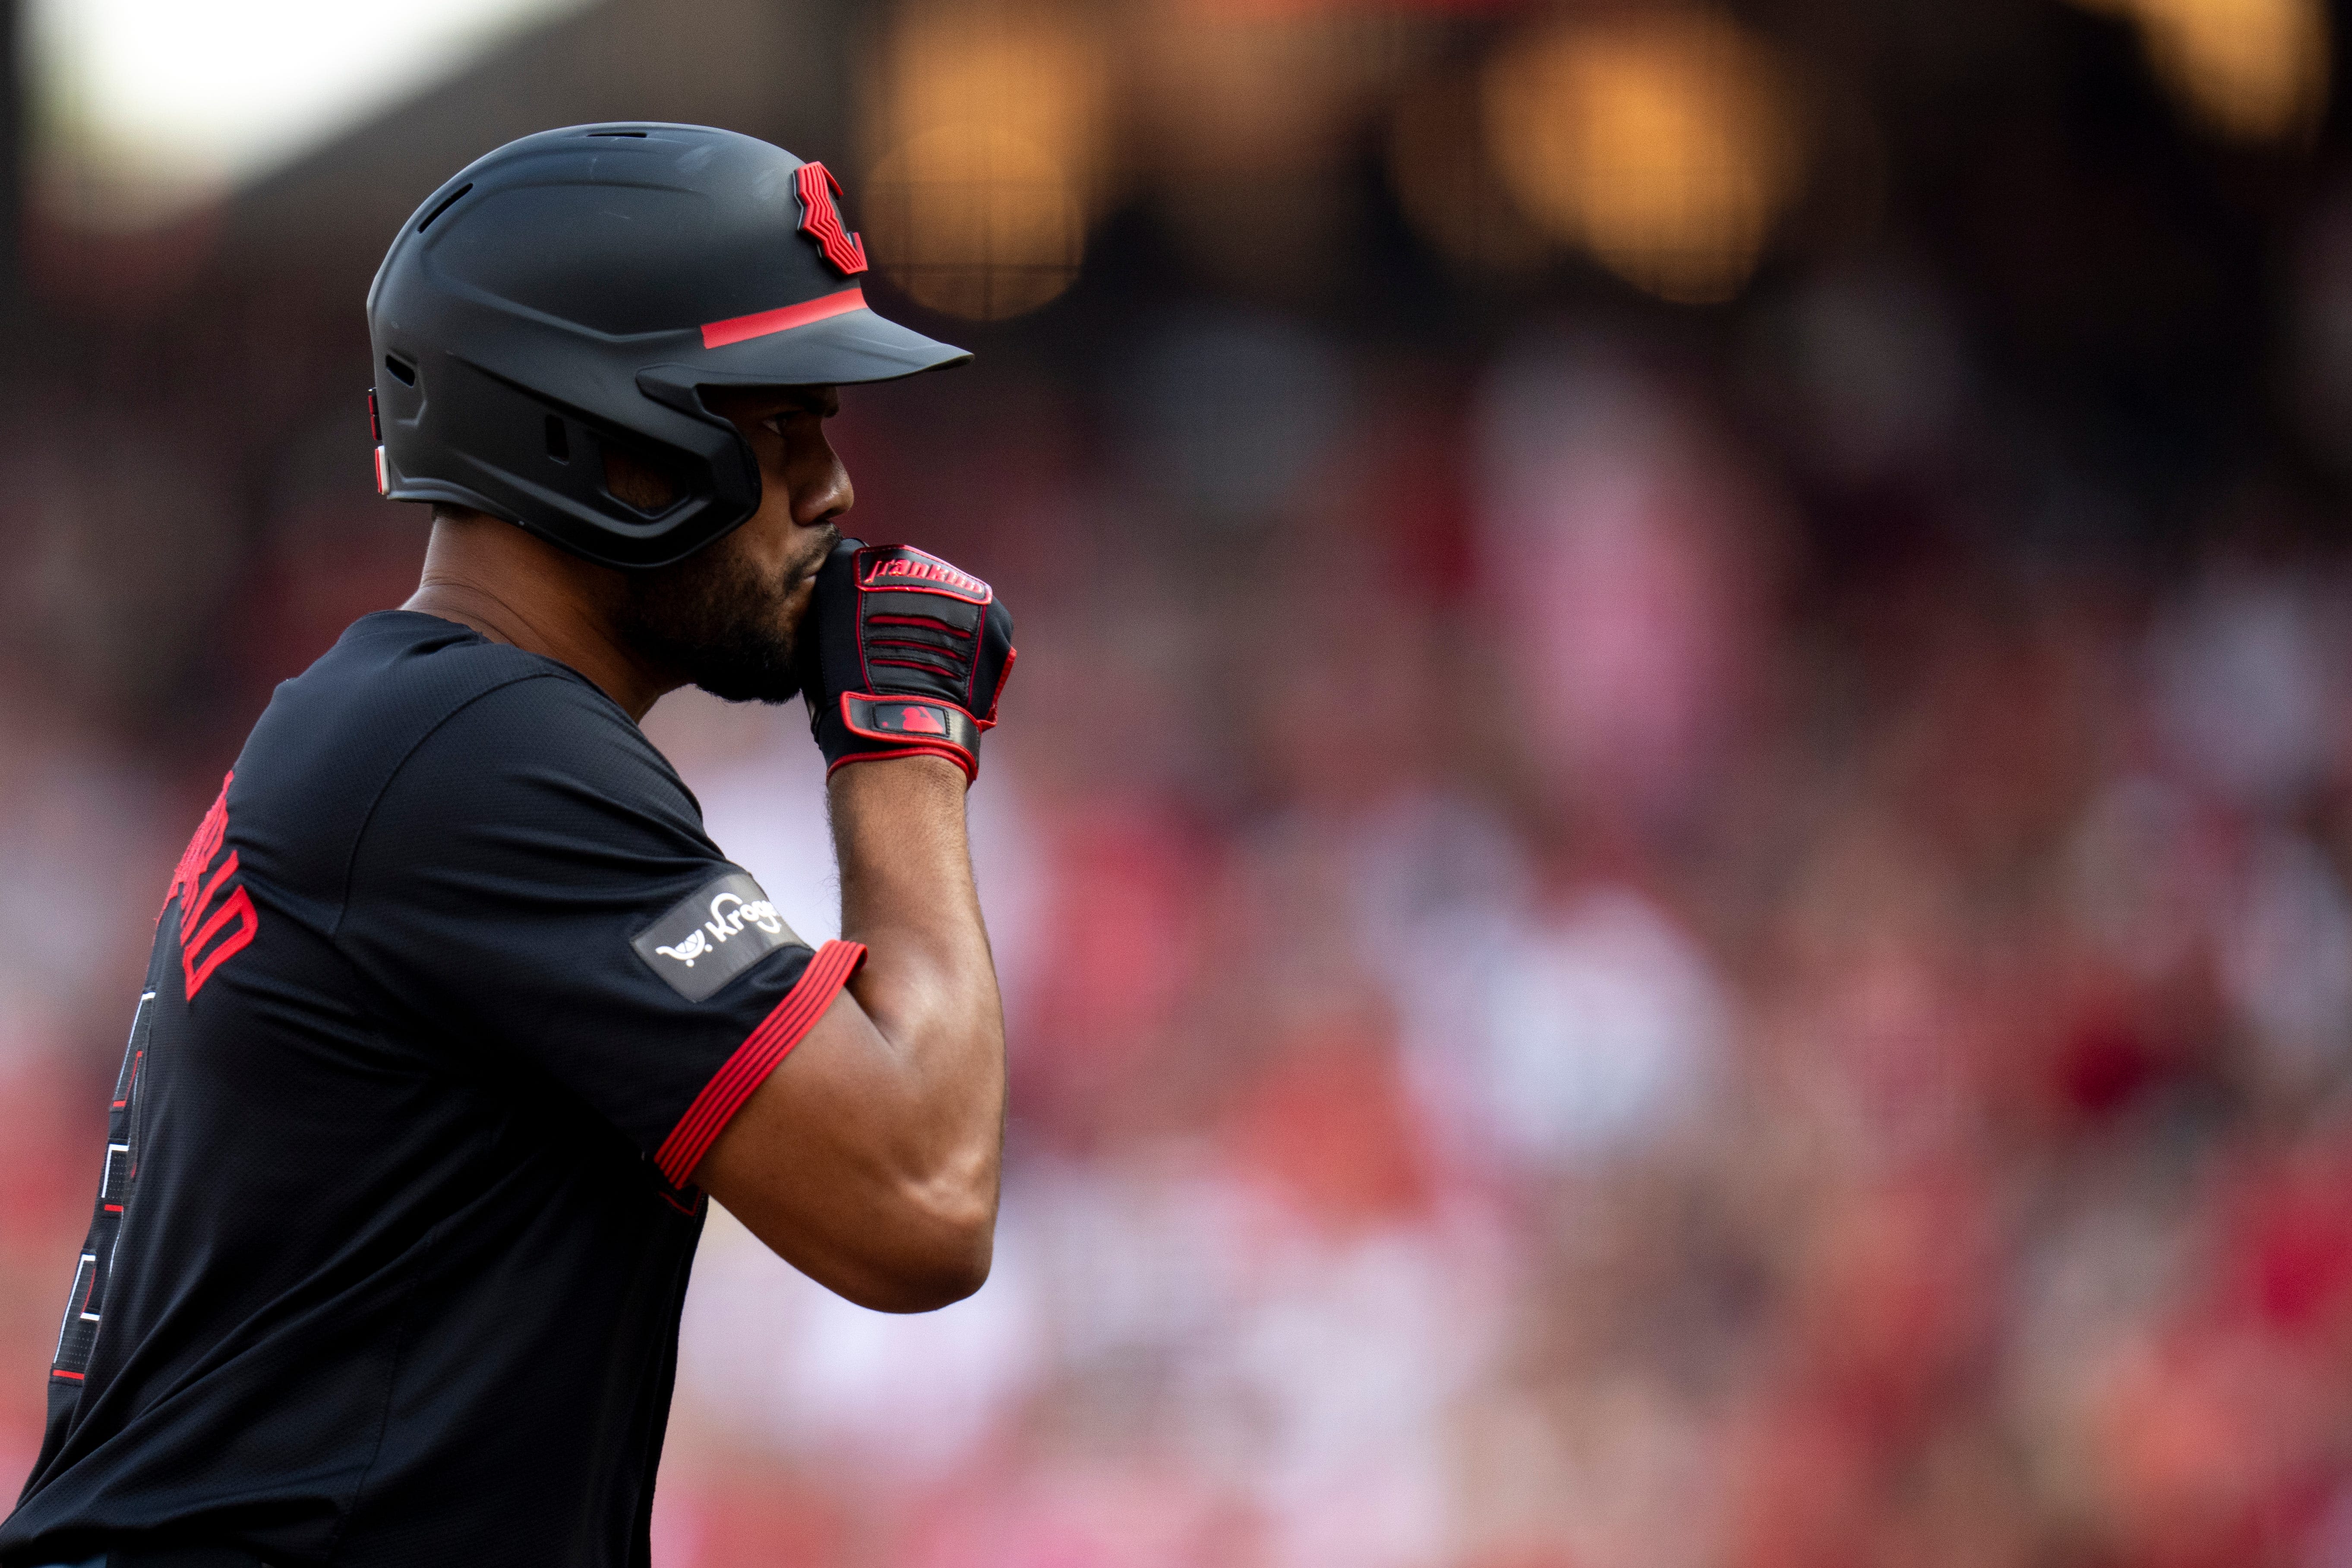 Jeimer Candelario's two homers and TJ Friedl's two-run bunt get the Reds a win over Boston